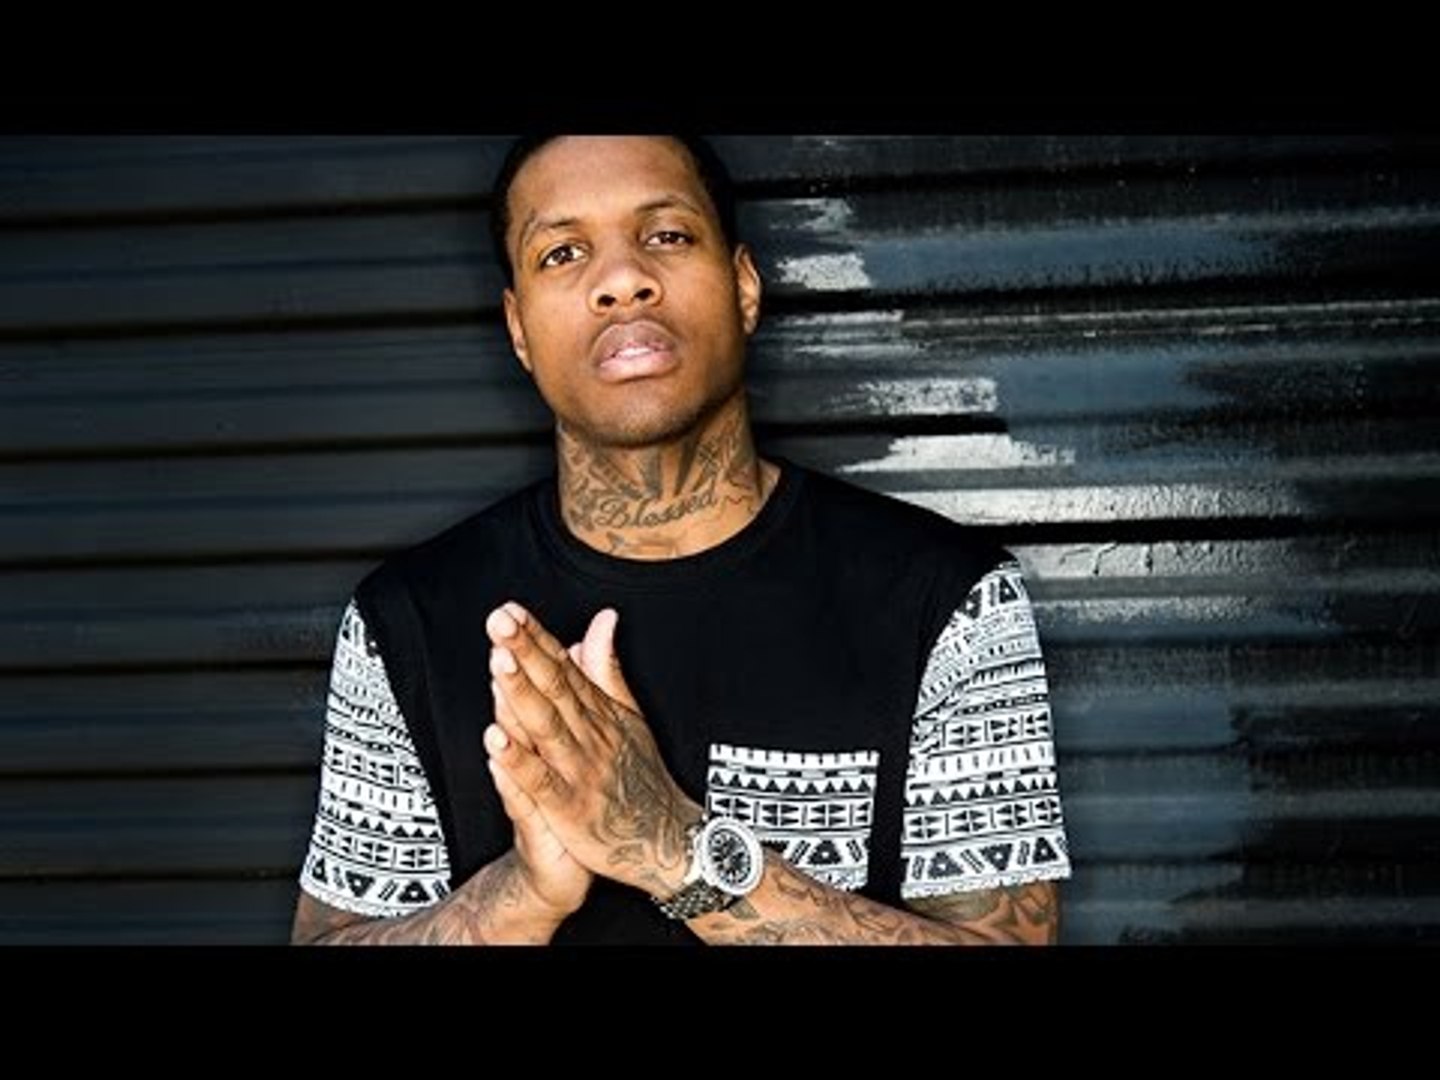 ⁣At the Samsung Experience event at this years Essence Fest, Lil Durk spoke on the state of Chicago.